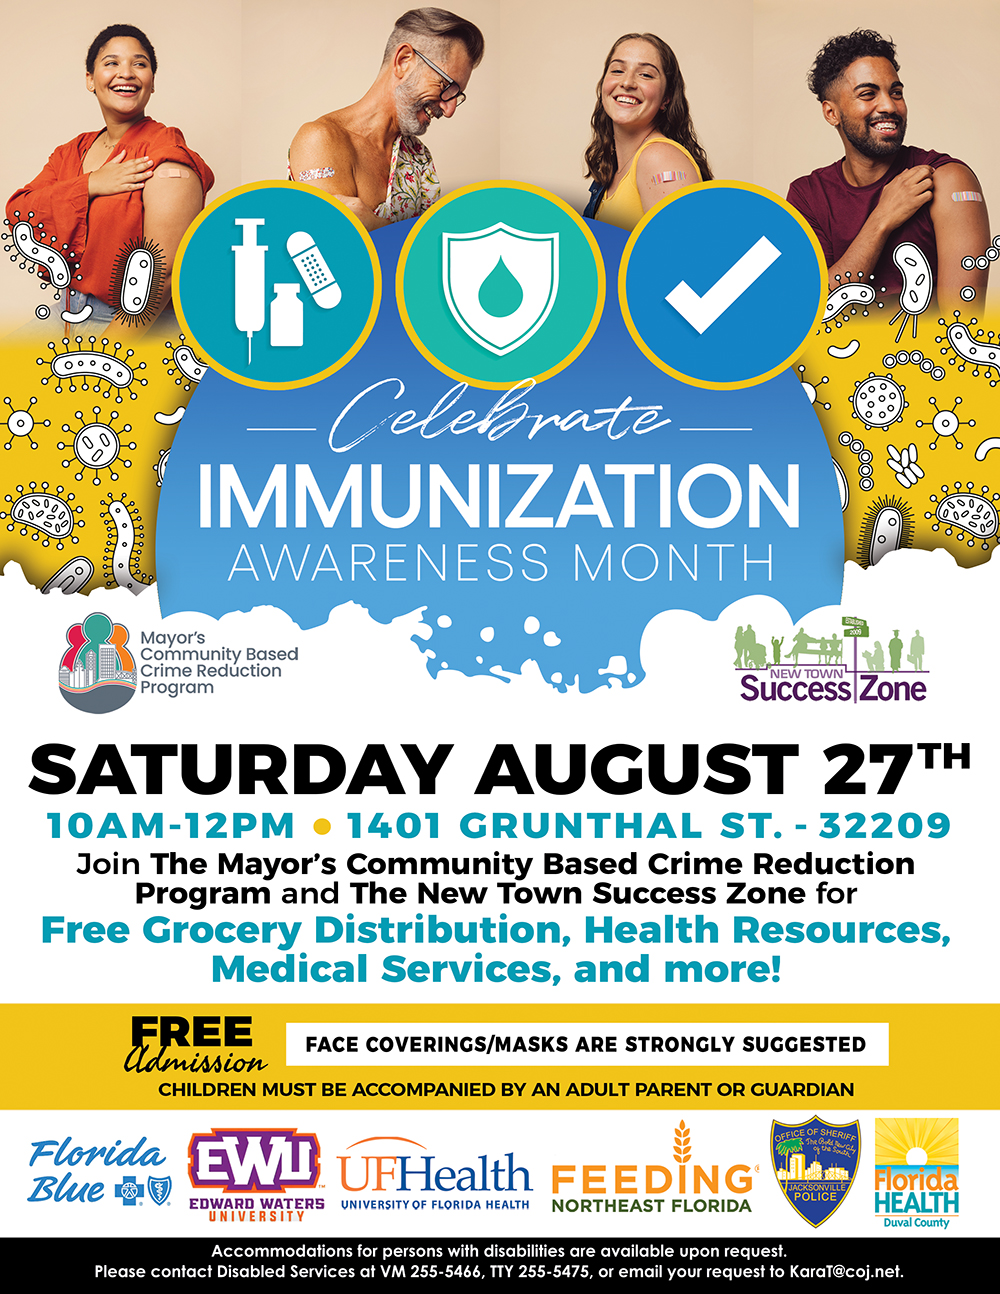 CBCR Program and NEw Town Success Zone present Celebrate Immunization Awareness Month Event on Saturday, August 27, 2022